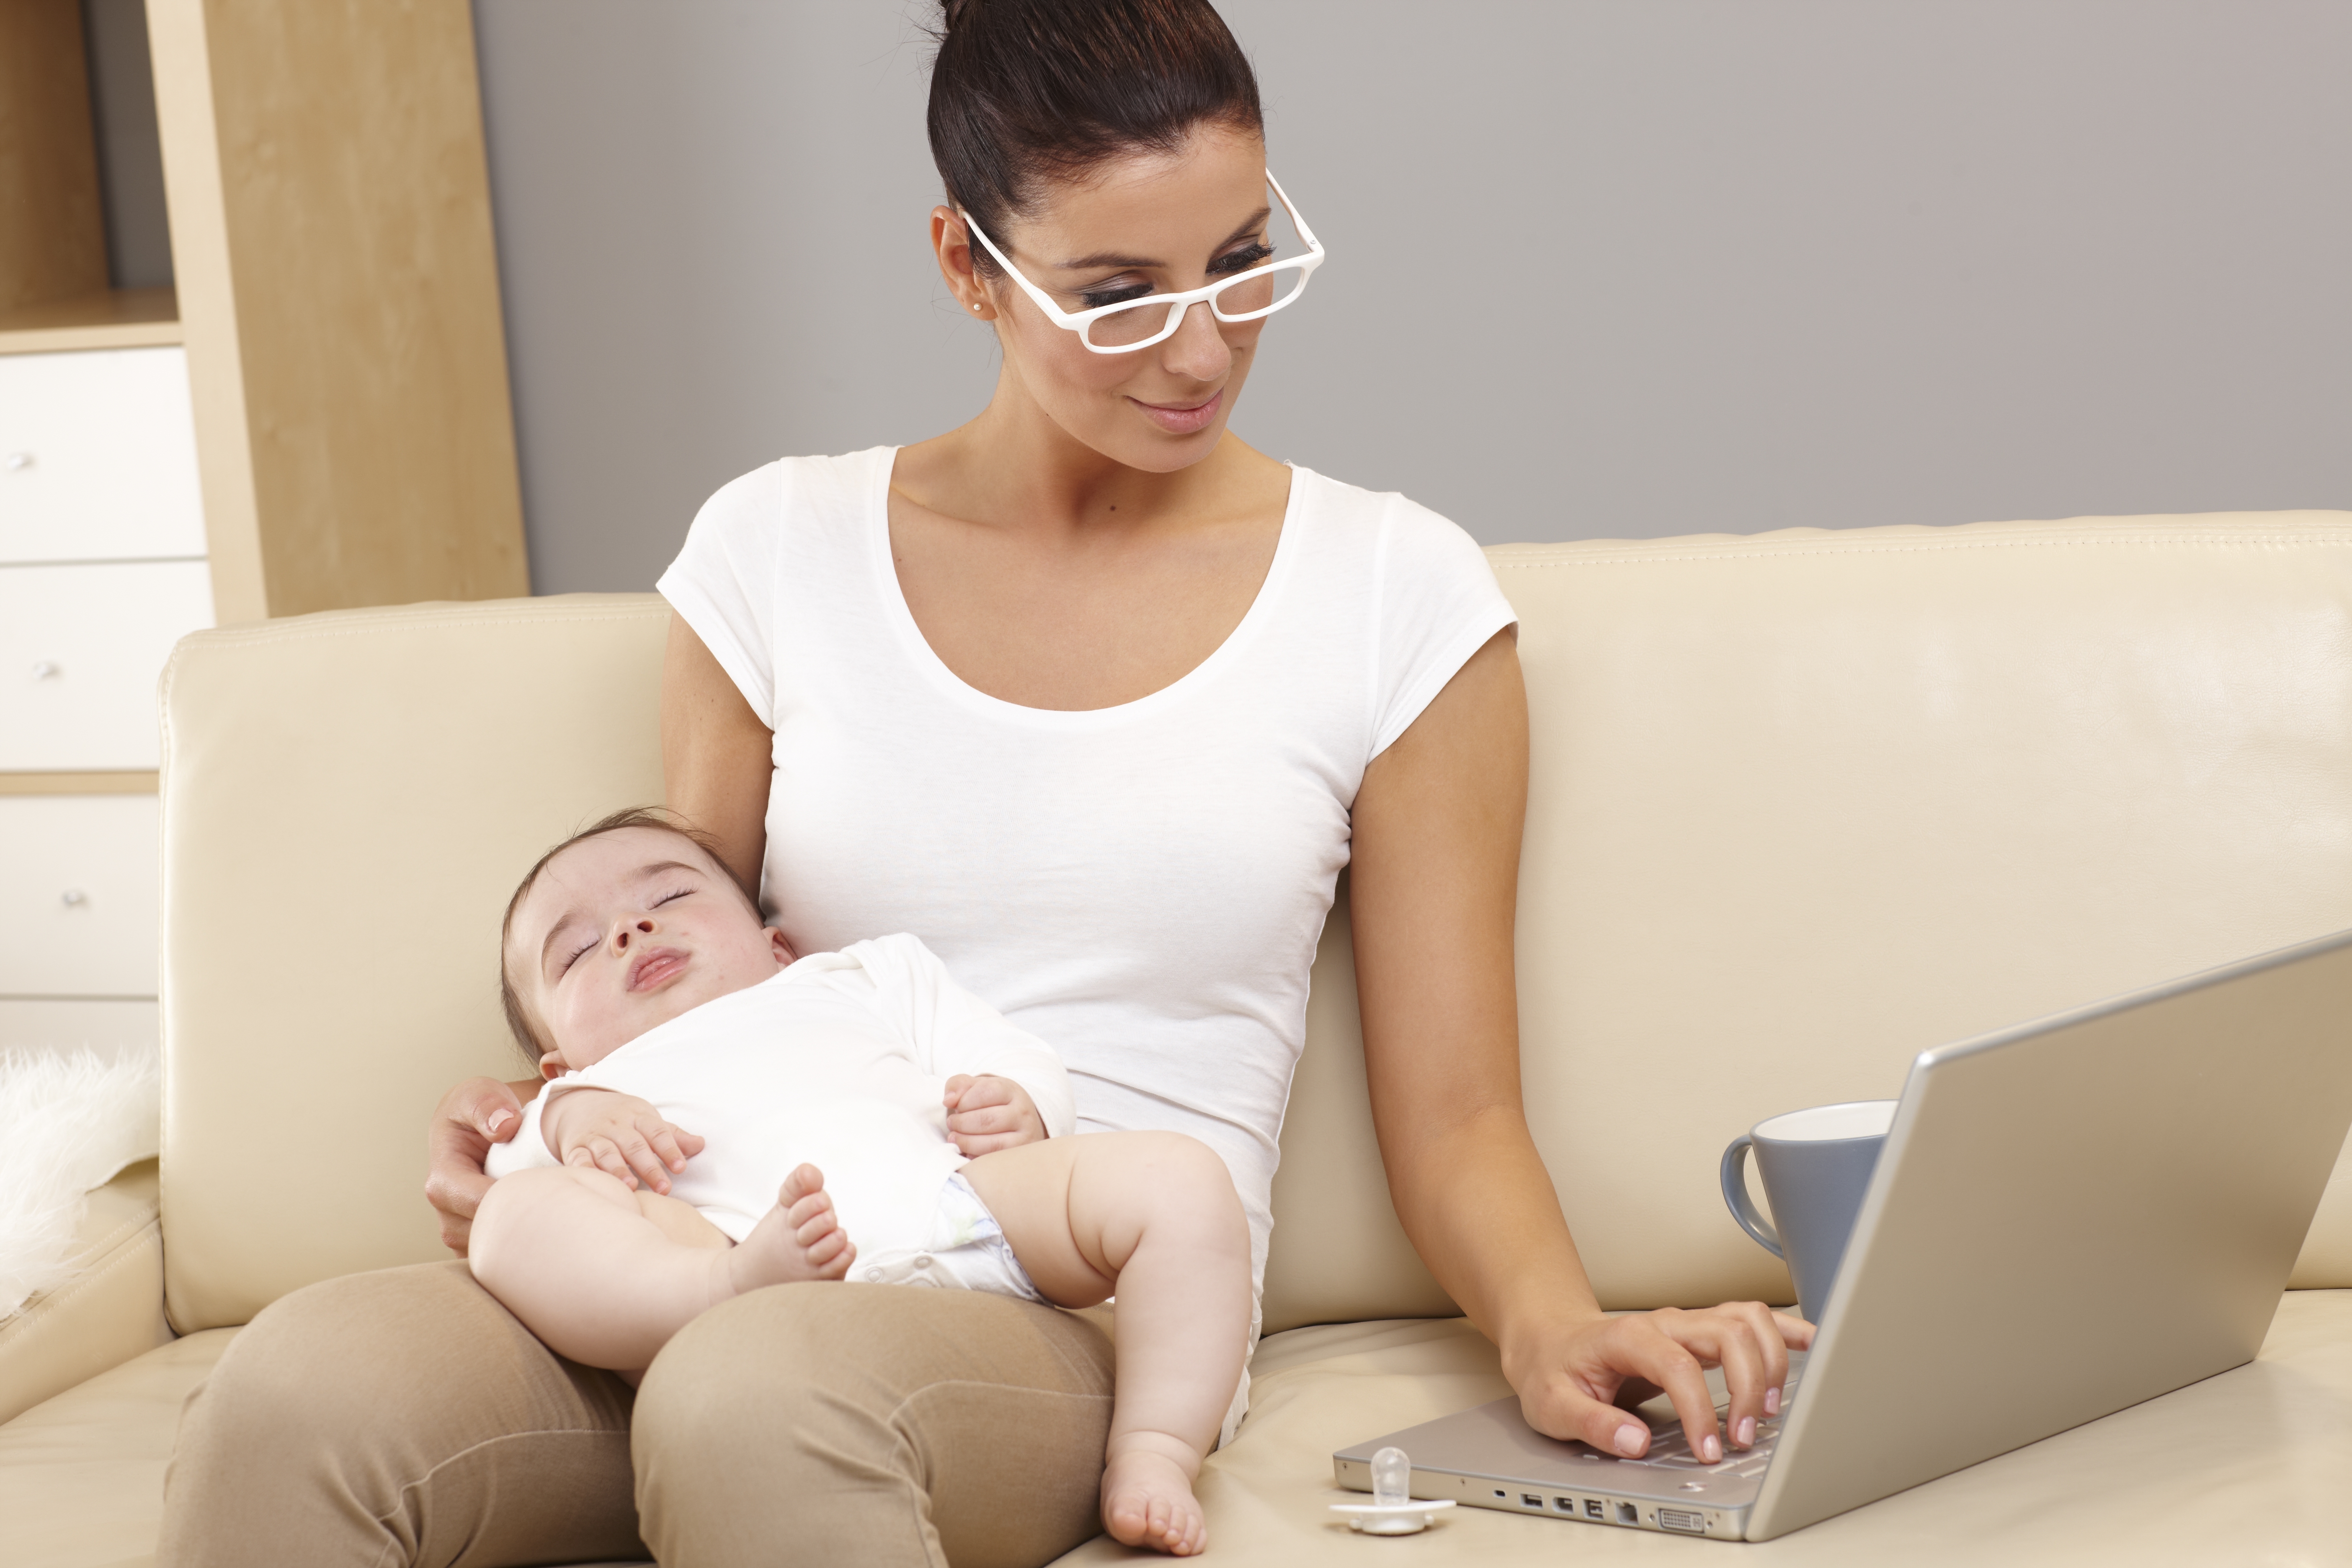 Work from Home still requires childcare